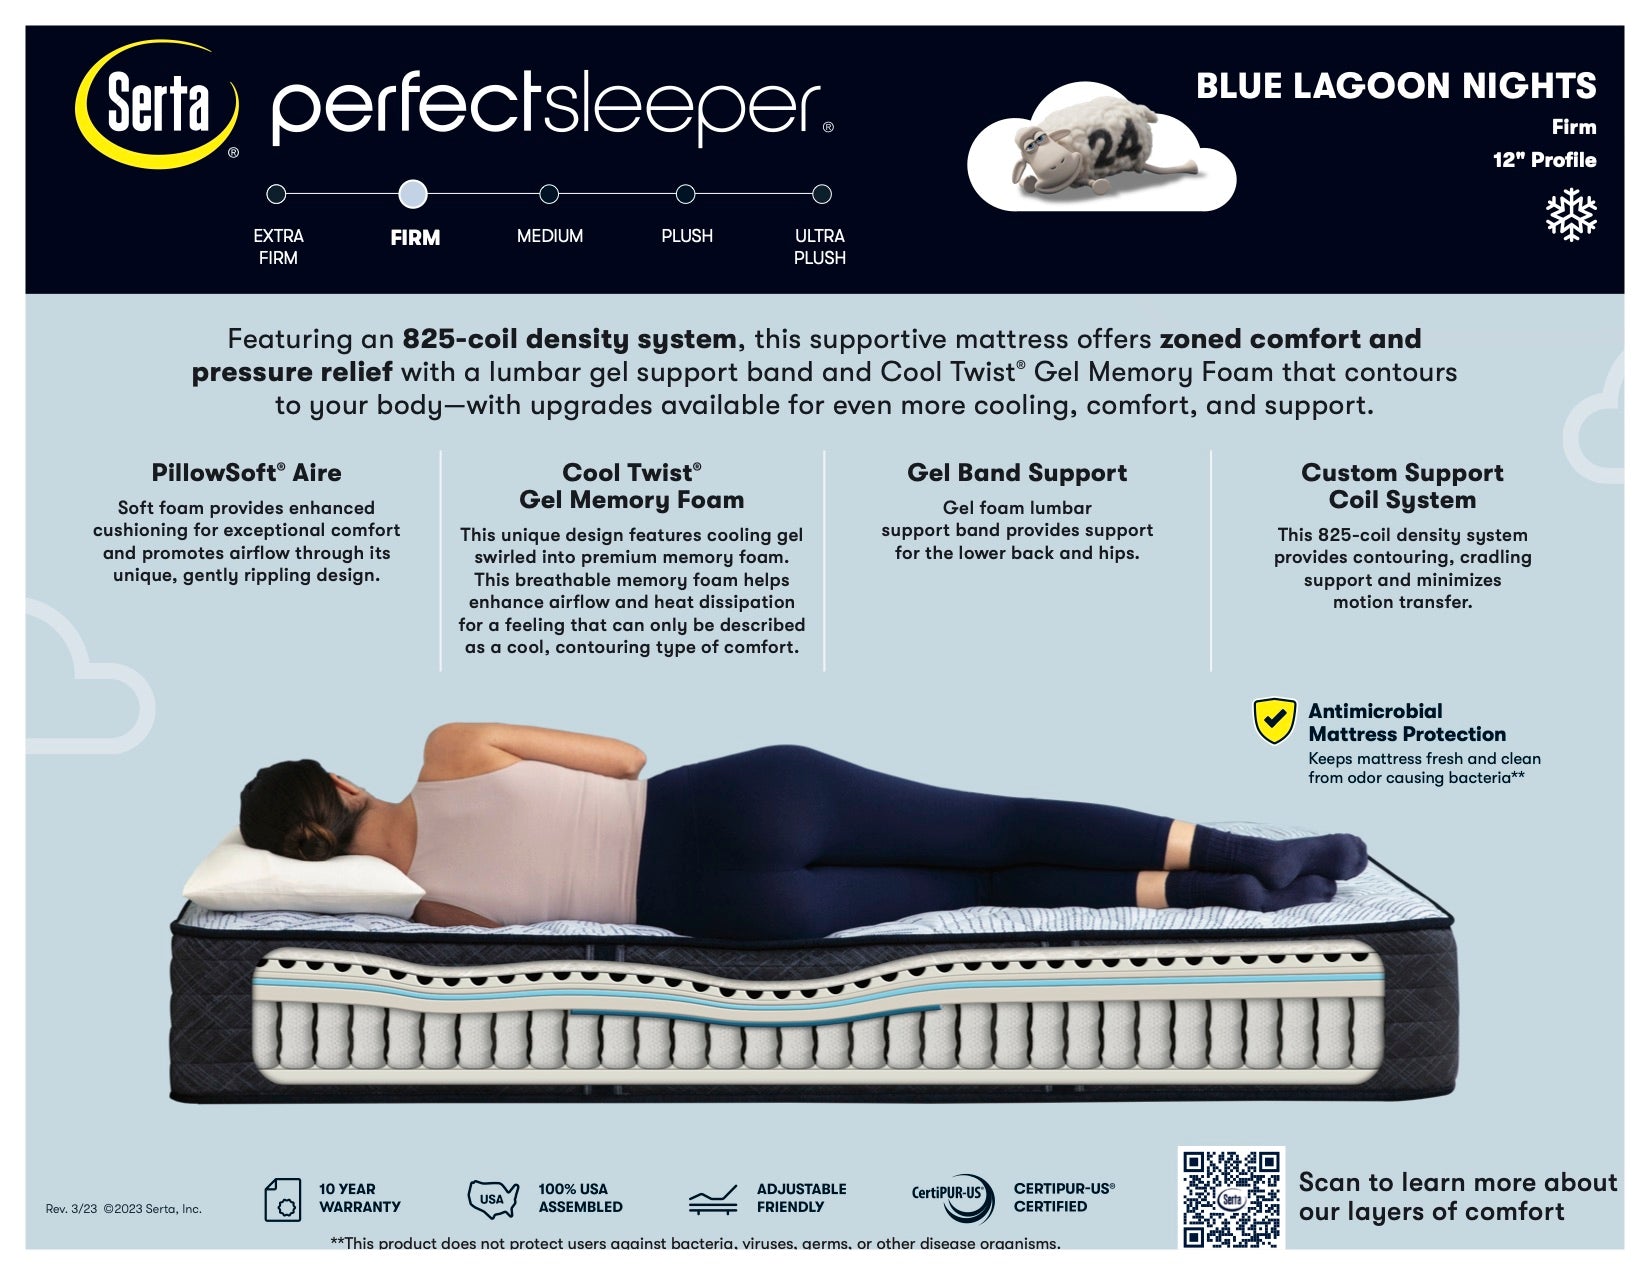 Spec Card for the Perfect Sleeper Blue Lagoon Nights Firm Mattress by Serta